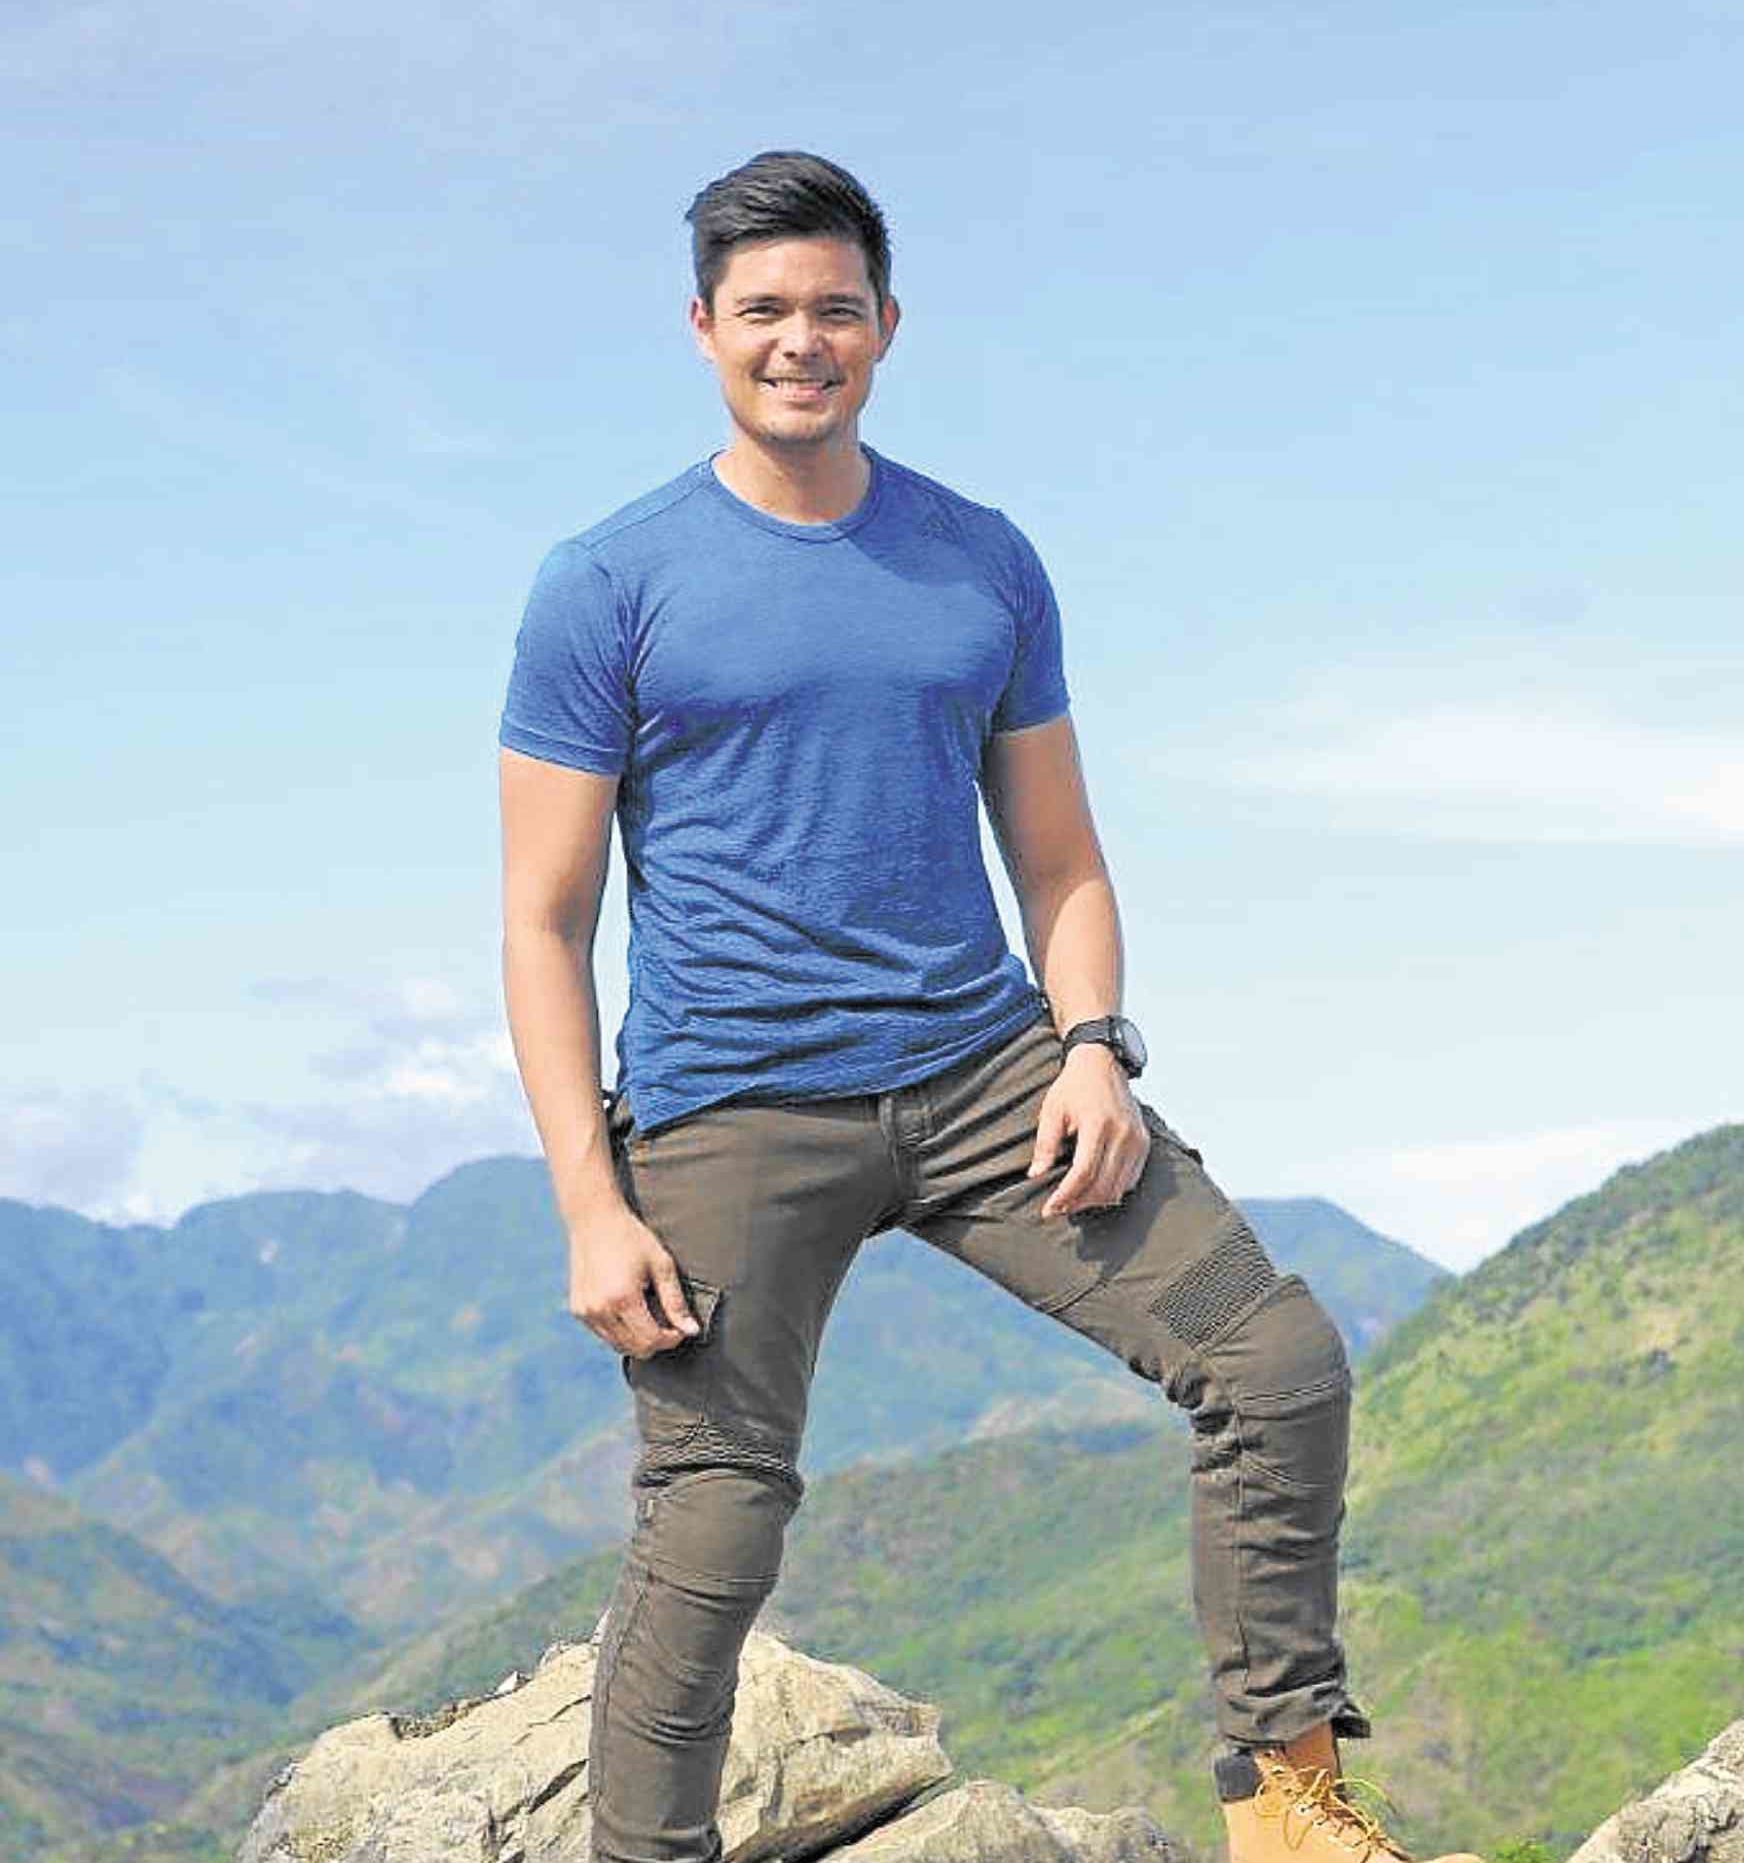 Why Dingdong has become more outspoken about his political views